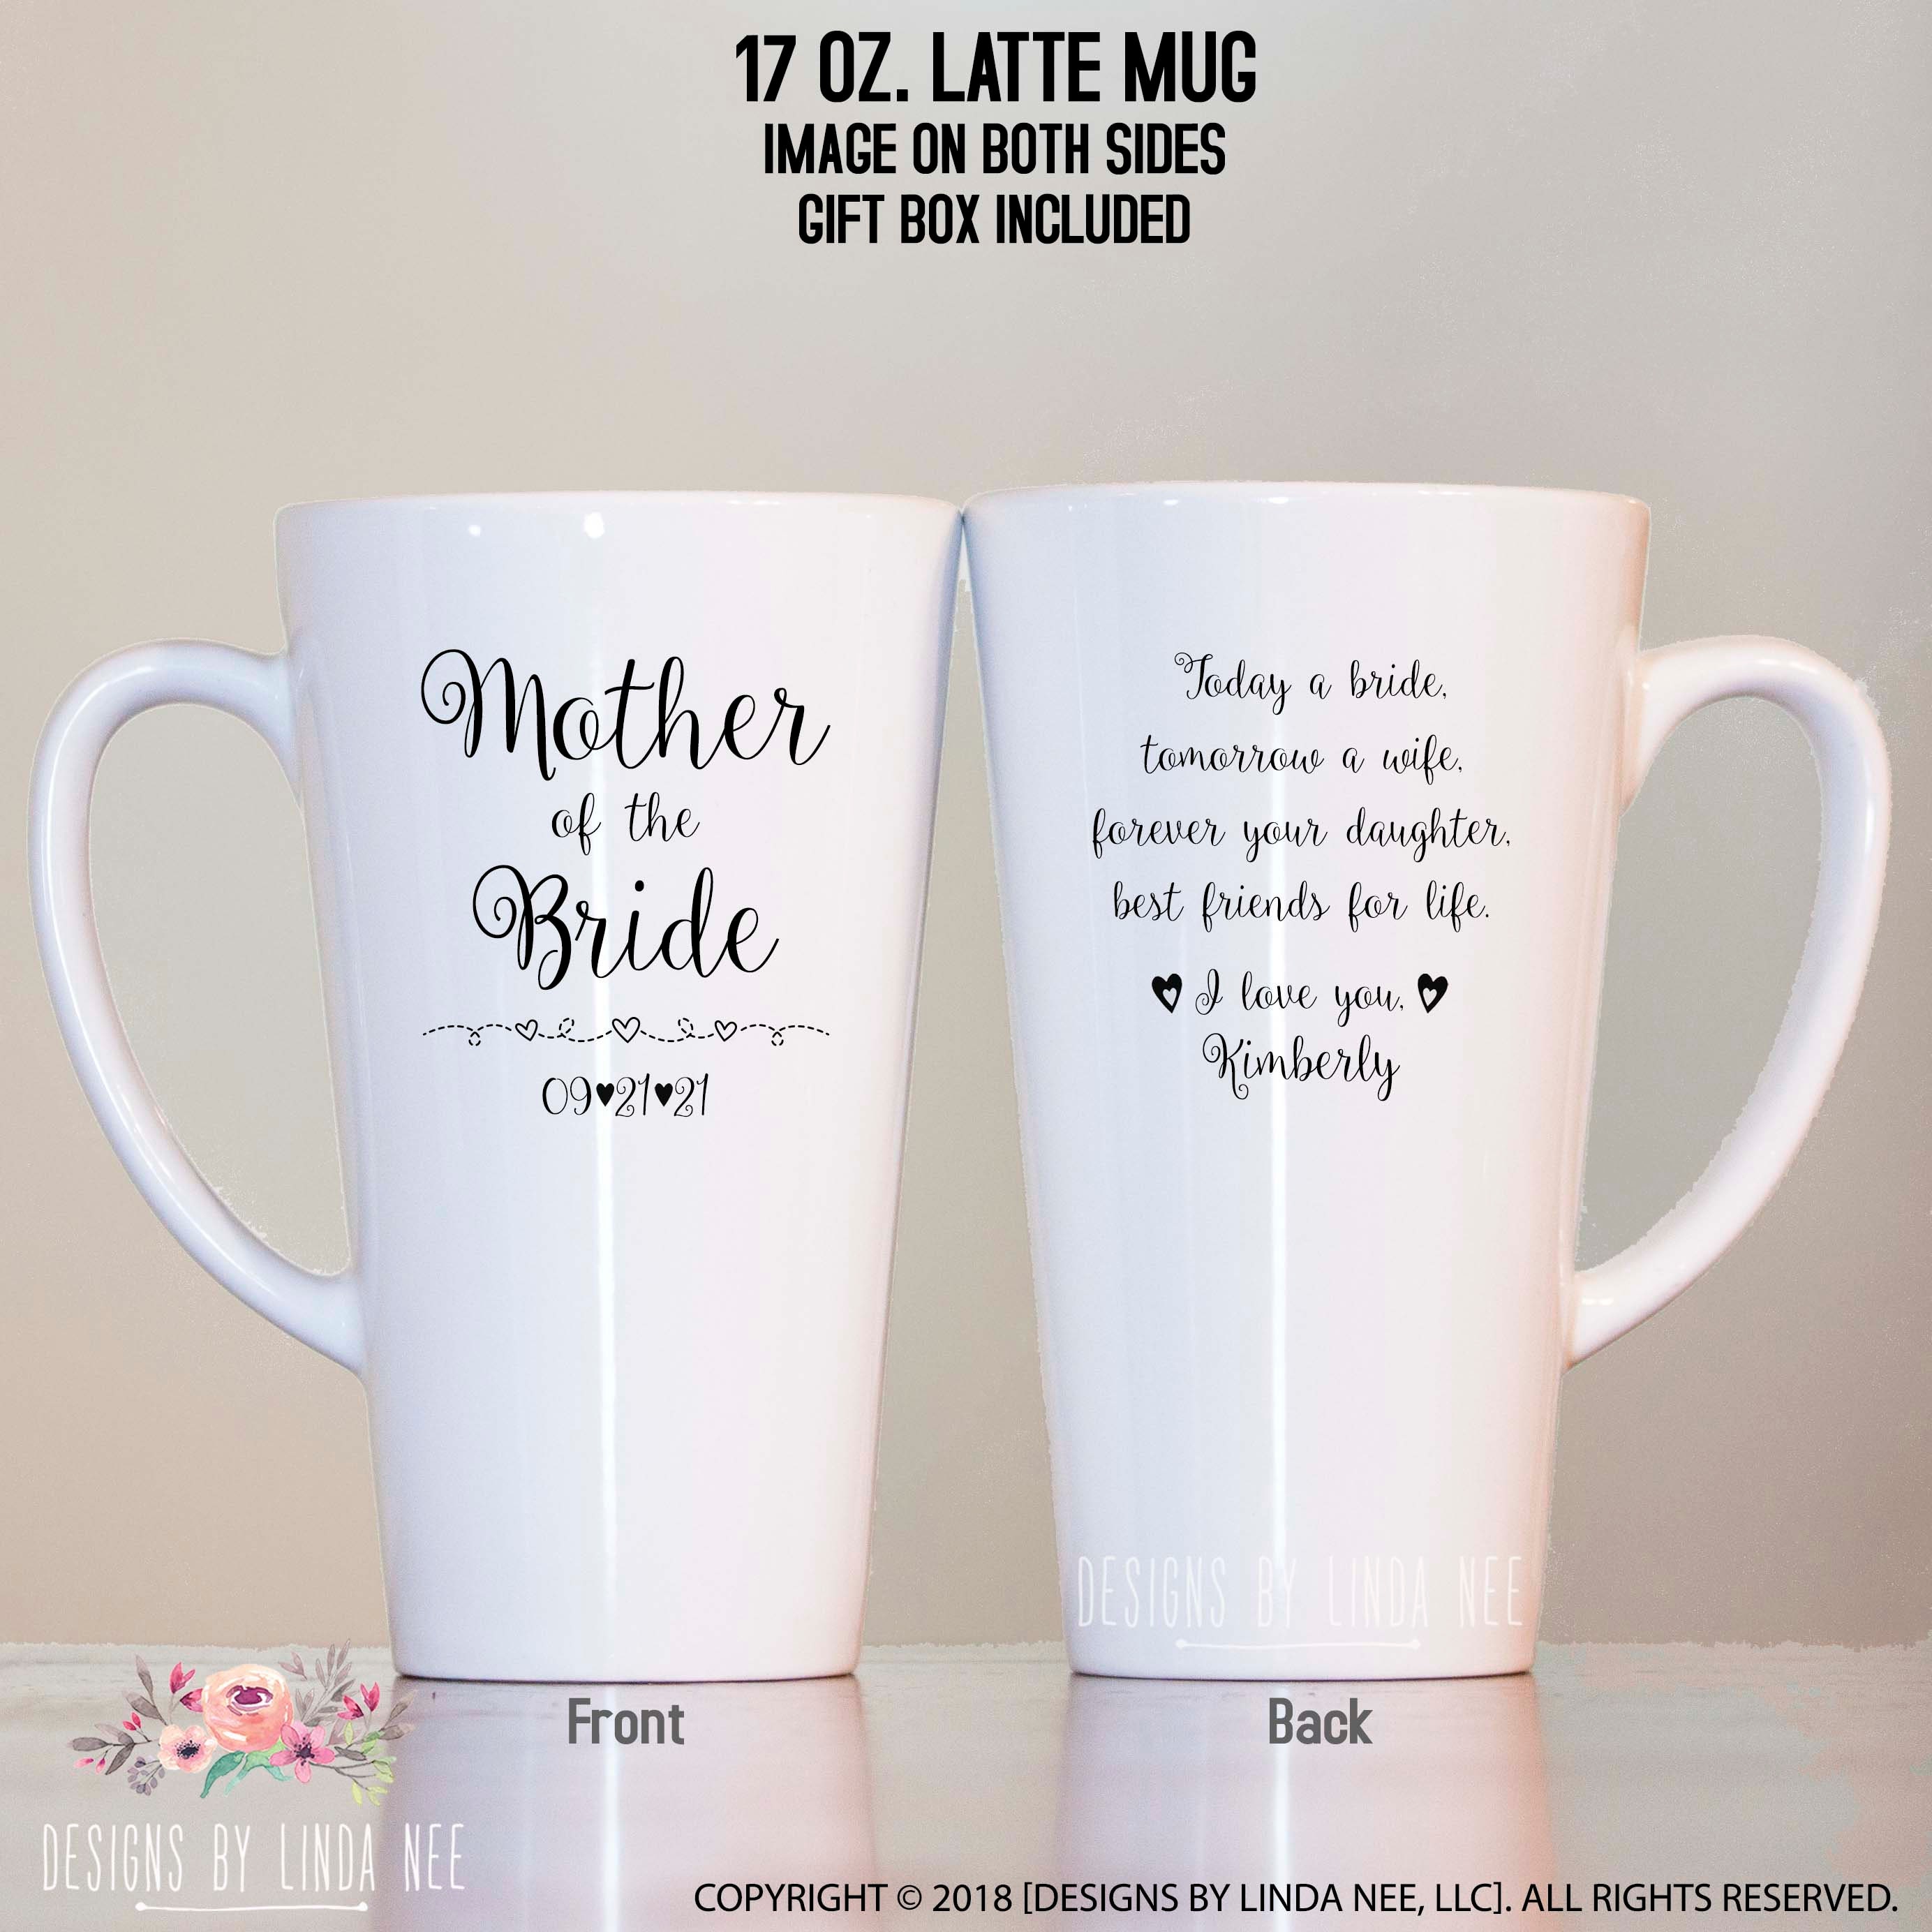 Mom Today A Bride Tomorrow A Wife Forever Your Daughter Best Friends For  Life Mug, Mom Mug, Gifts For Mom On Wedding - Highly Unique